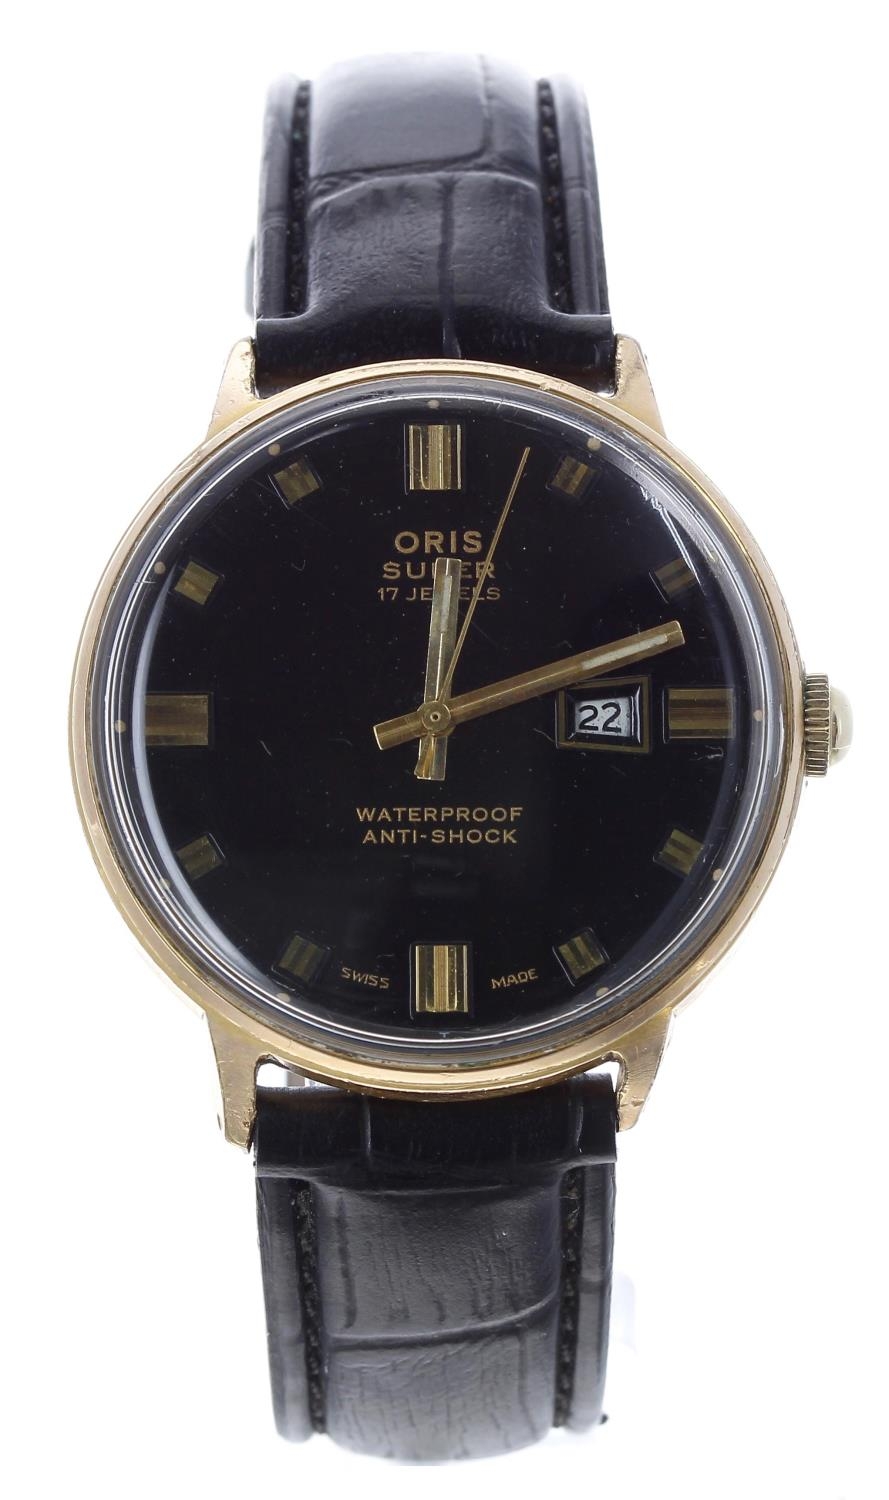 Oris Super gold plated and stainless steel gentleman's wristwatch, circular black dial with